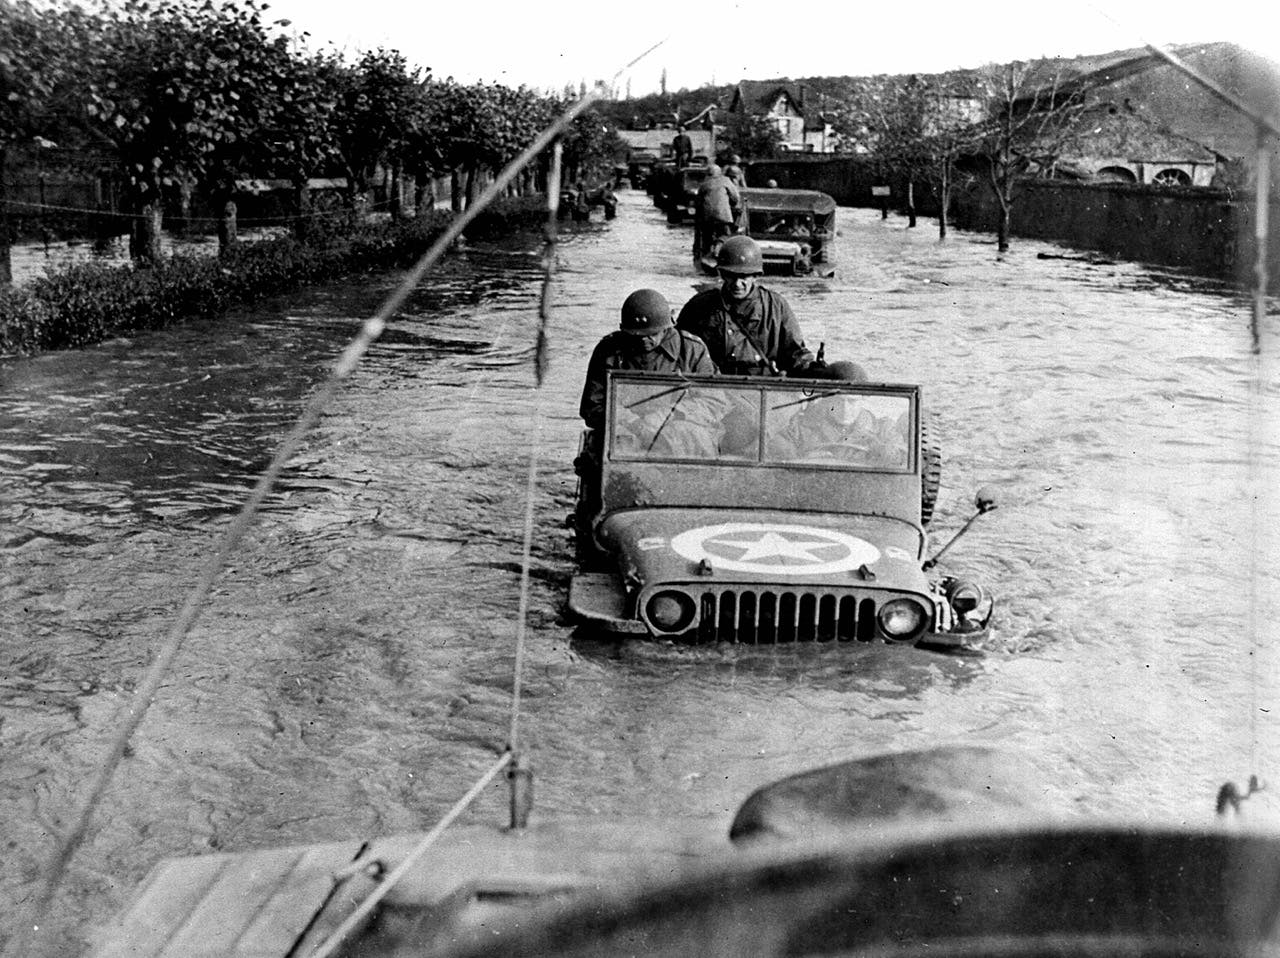 American convoy driving on flooded road in Jeeps